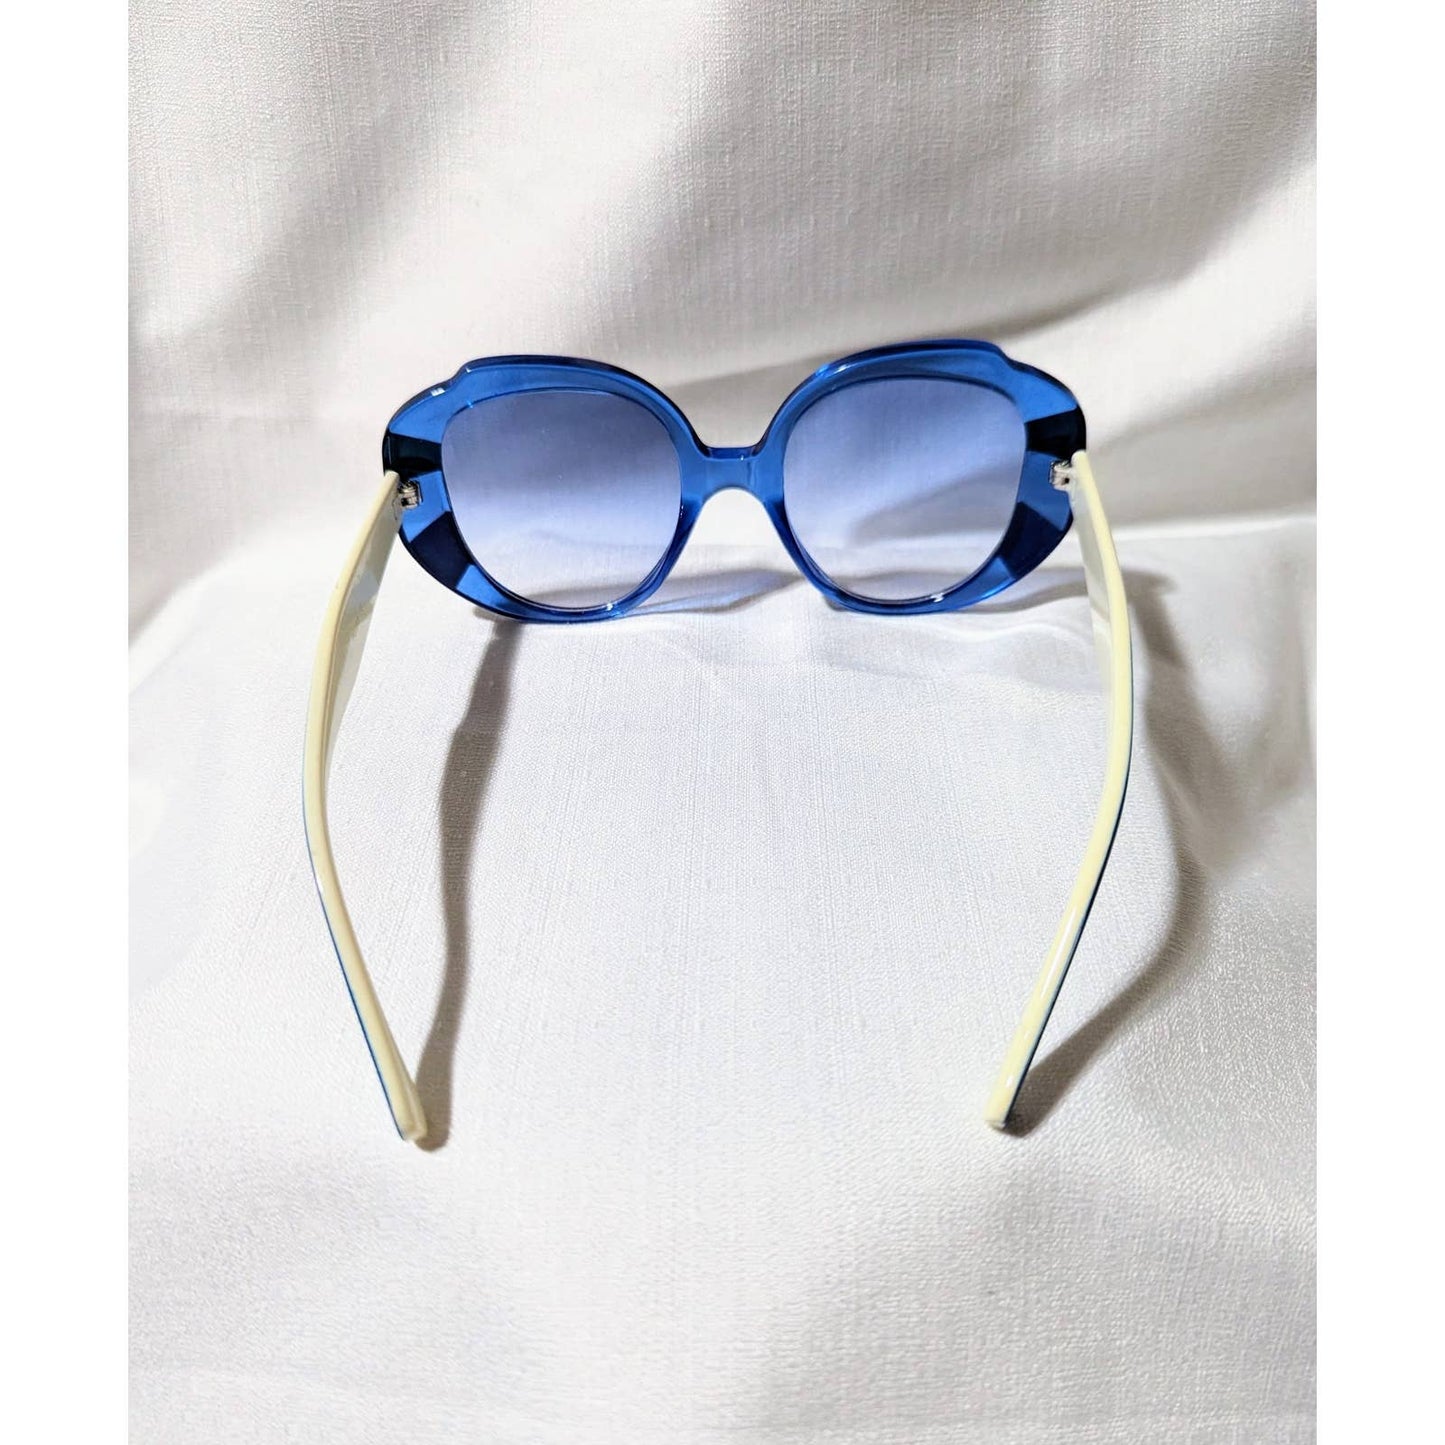 Mimi Blue Retro Vintage Style Butterfly Sunglasses with Blue Lenses UV Protection